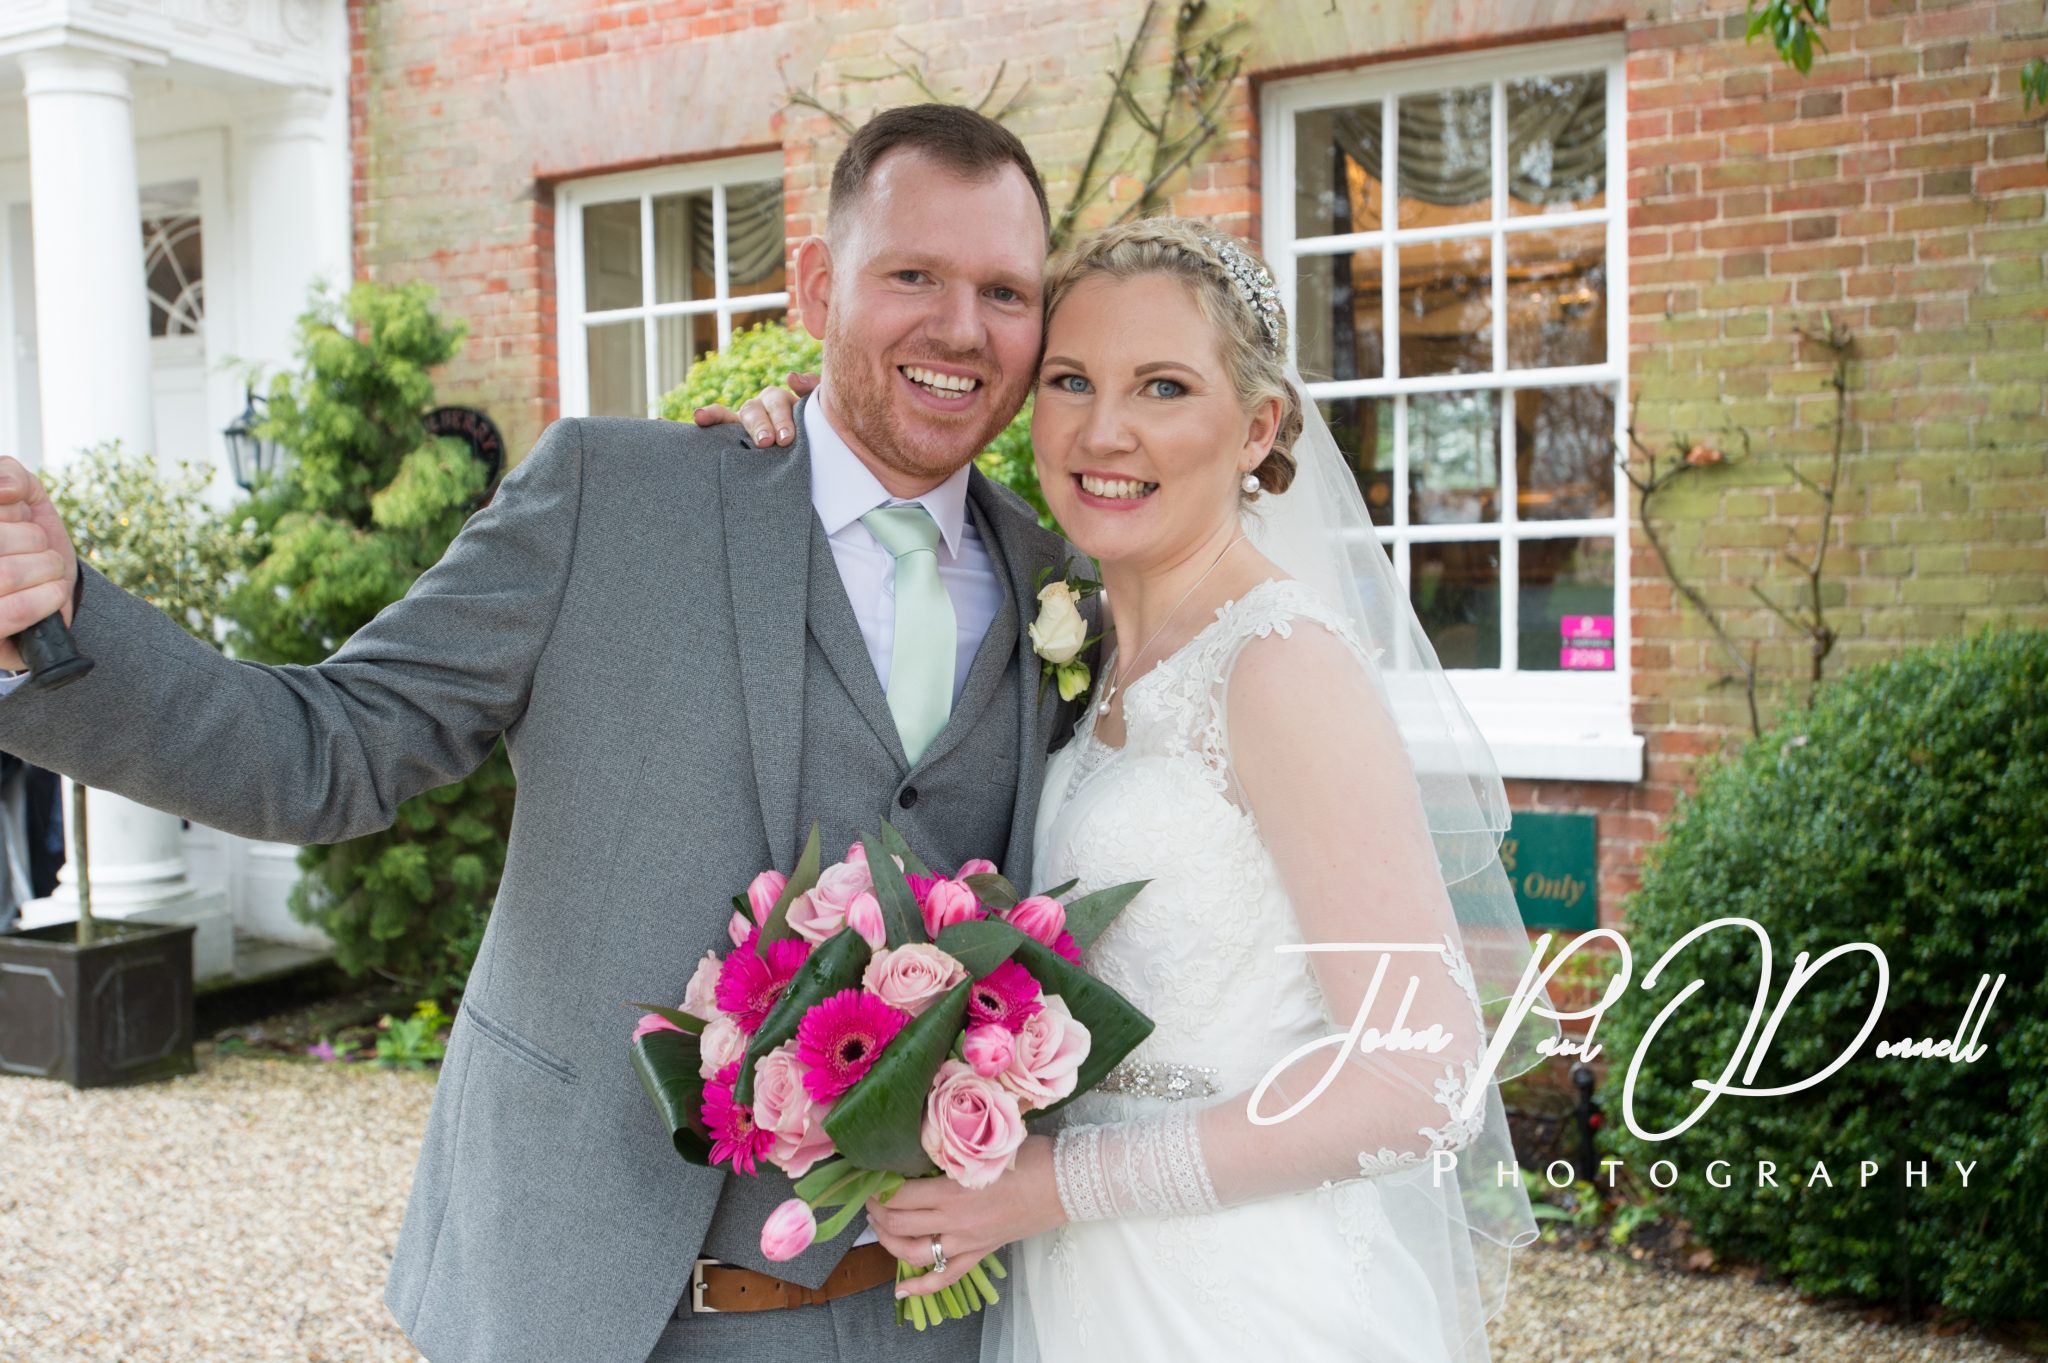 Laura and Daniels Wedding at Mulberry House Essex